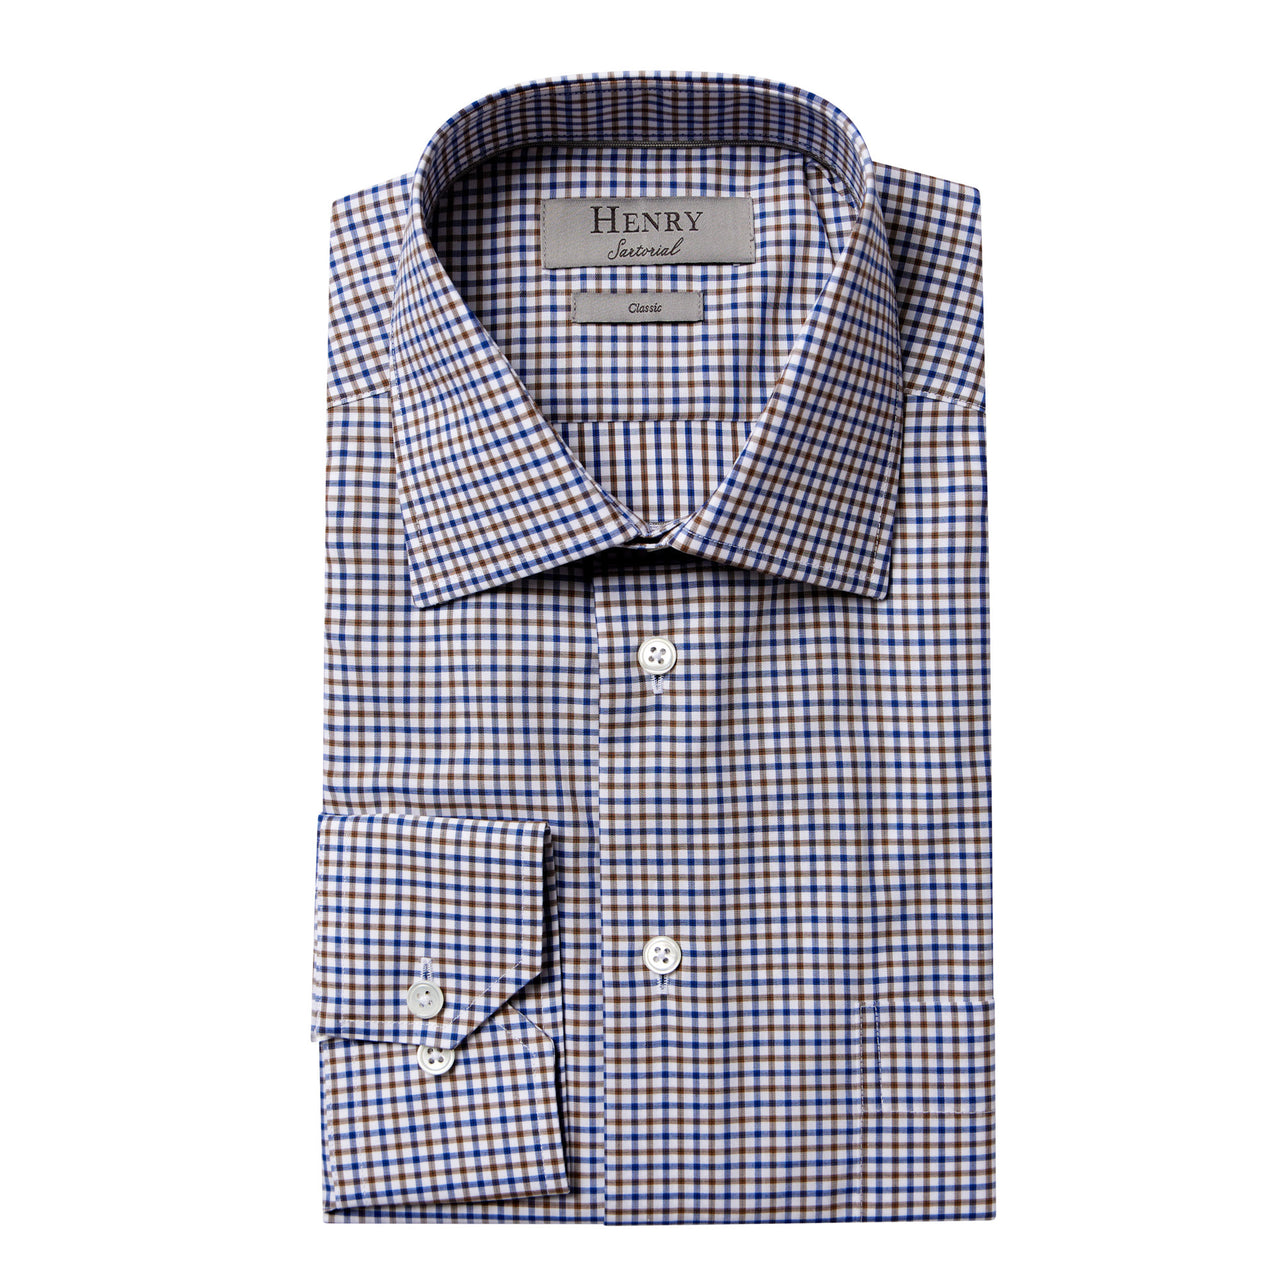 HENRY SARTORIAL Check Casual Shirt WHITE/BROWN